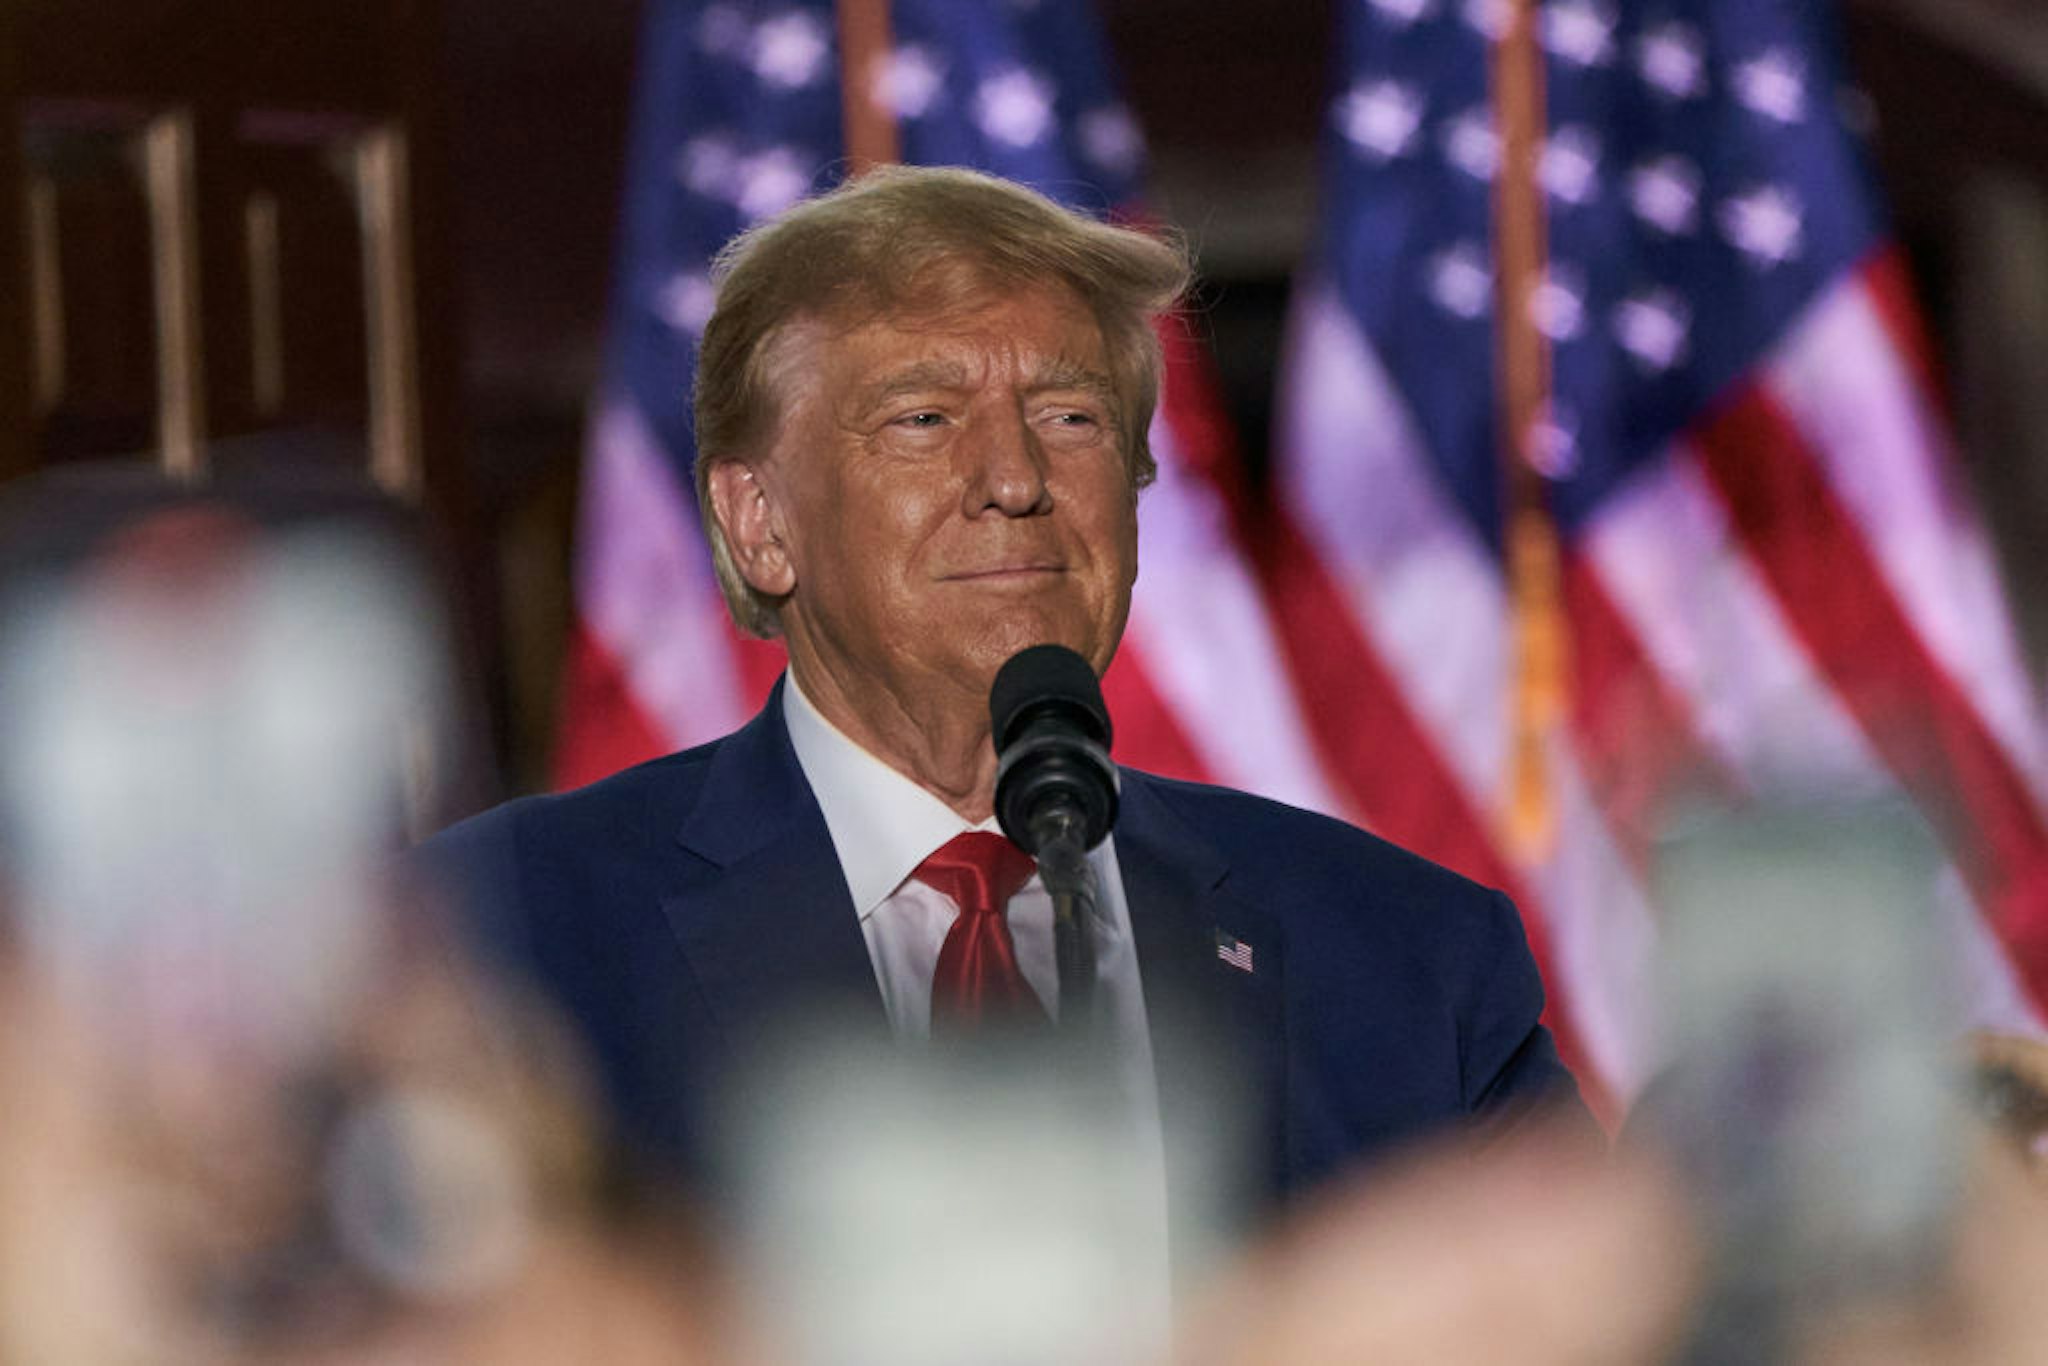 Former US President Donald Trump during an event at Trump National Golf Club in Bedminster, New Jersey, US, on Tuesday, June 13, 2023. Trump today pleaded not guilty in a Miami courtroom to federal charges he mishandled state secrets and immediately resumed rallying supporters behind his 2024 presidential bid.